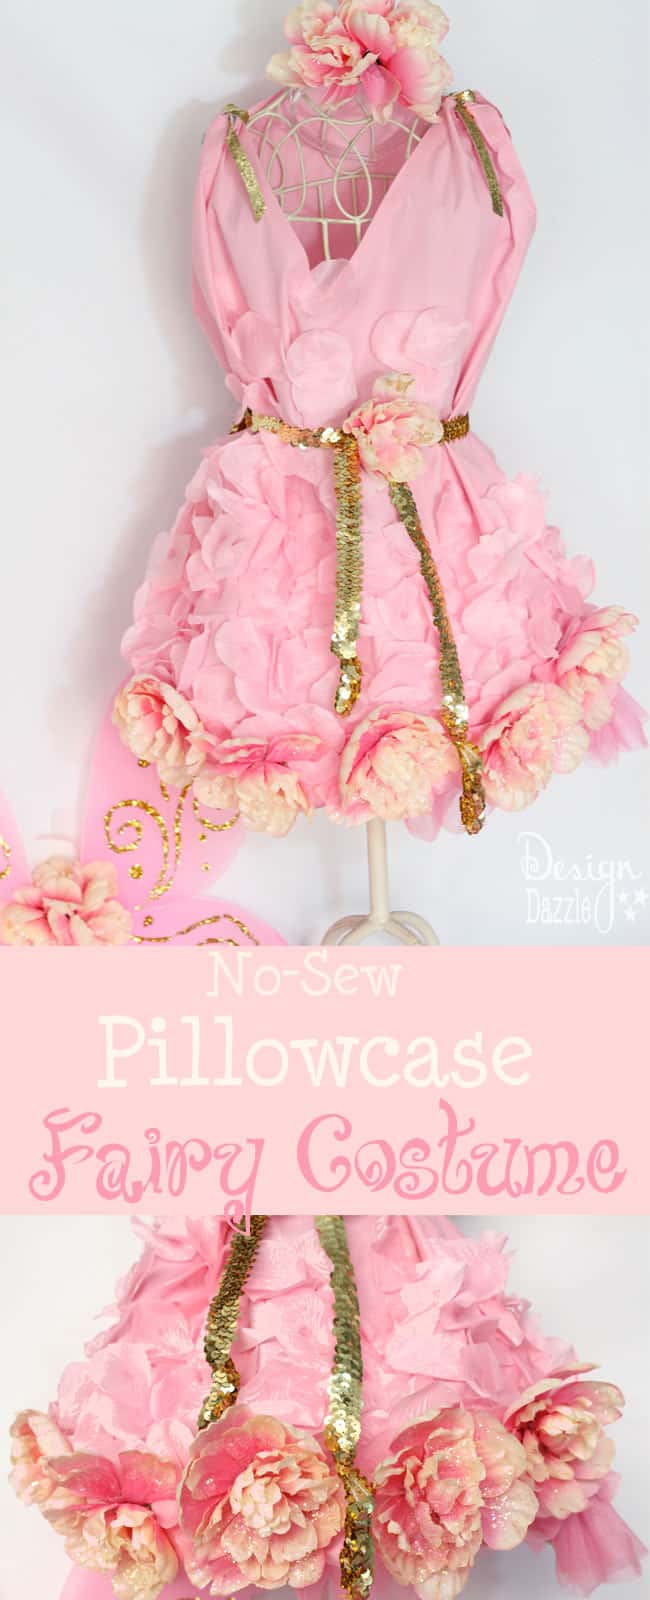 Can you believe this costume started as a pillowcase? Dollar store items were used to embellish this darling and inexpensive NO-SEW fairy costume! Design Dazzle #nosewcostume #fairycostume #pillowcasecostume